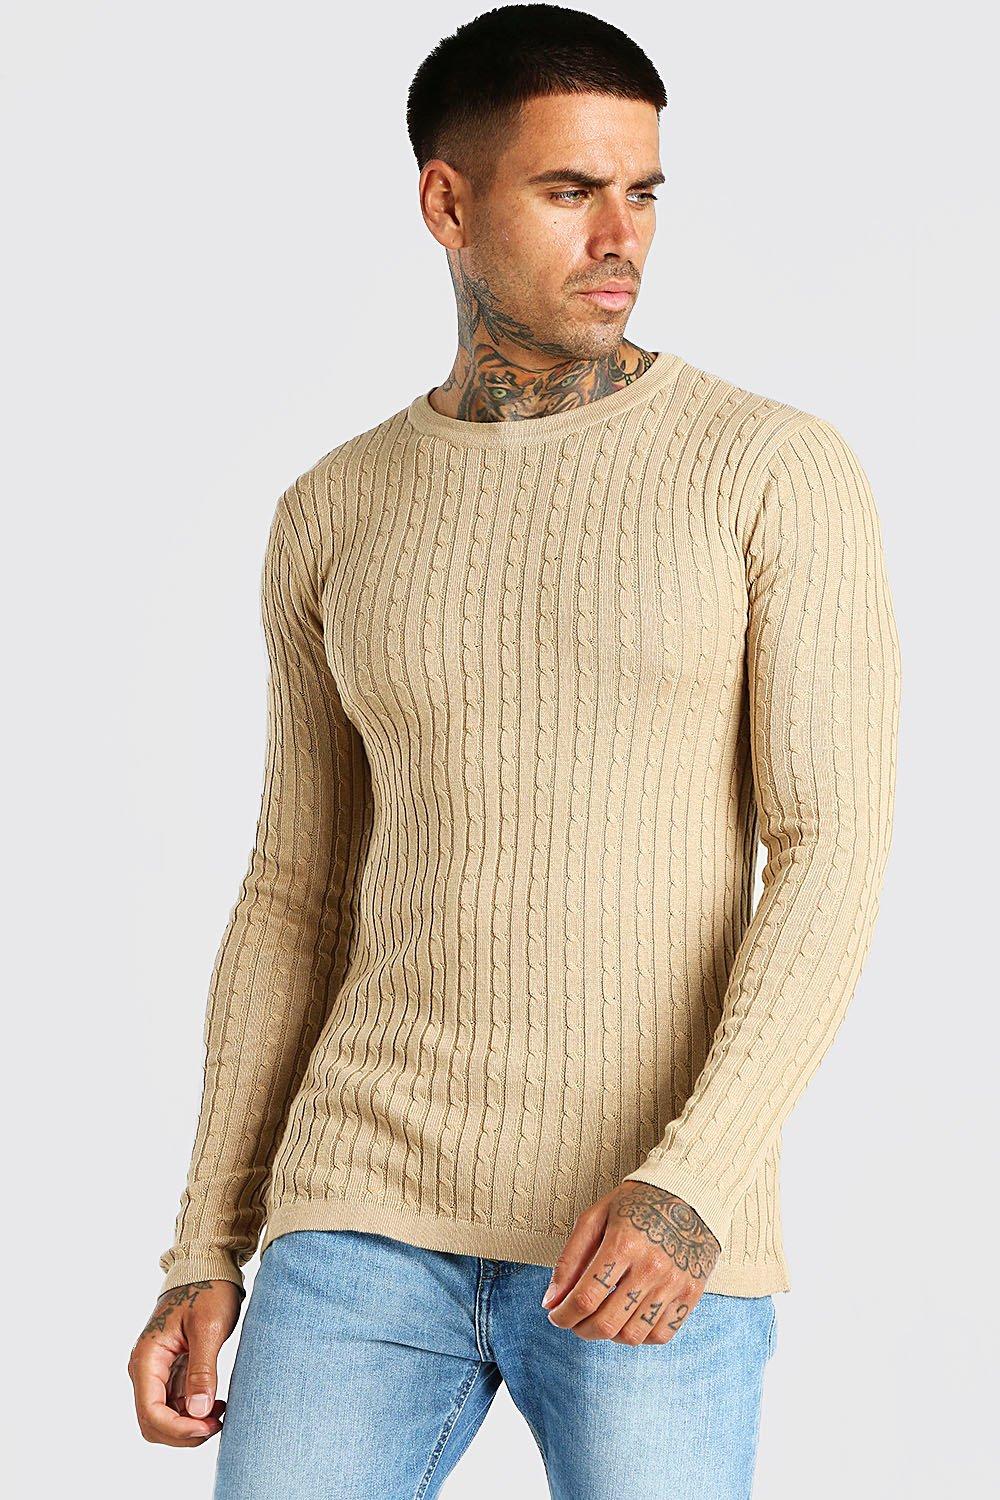 HTOOHTOOH Mens Long Sleeve High Neck Cable Knit Pullover Stylish Sweater 